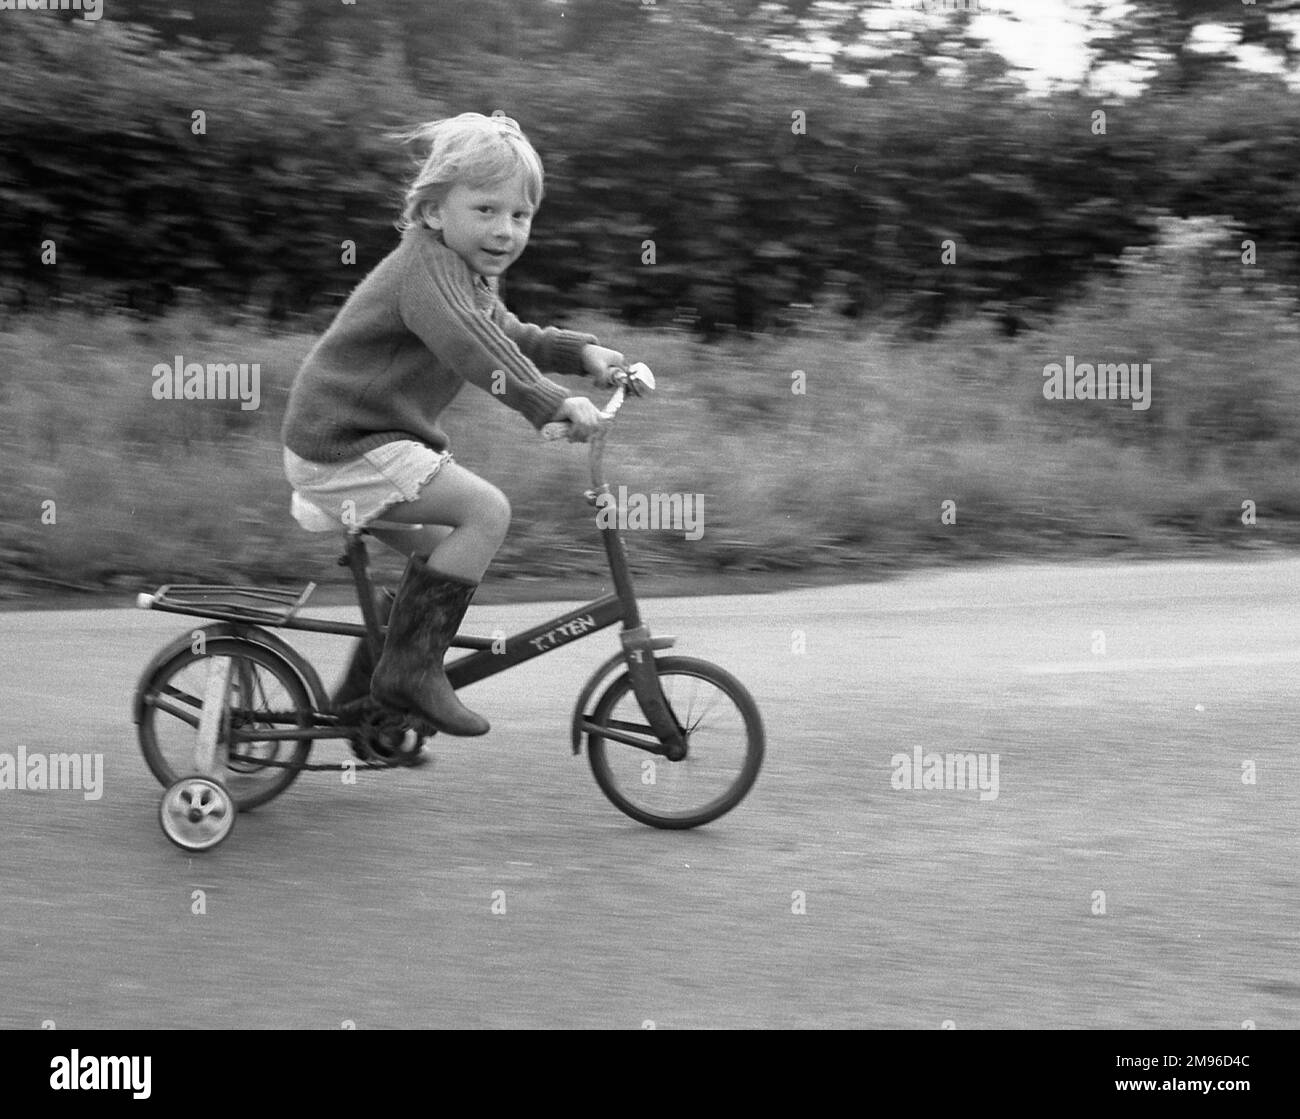 A little boy riding a bicycle with stabilisers on it. Stock Photo